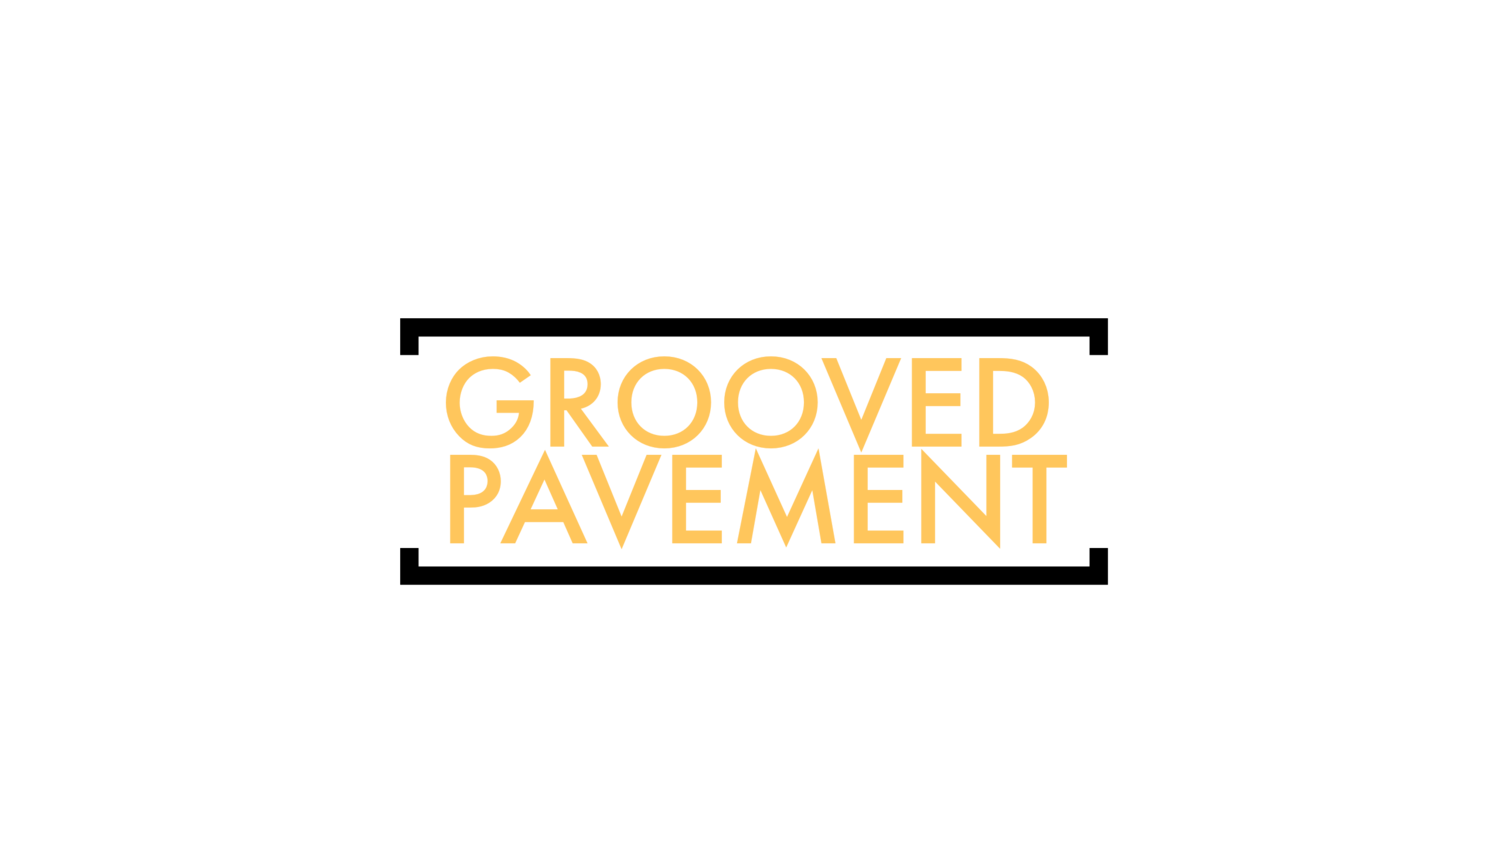 The Grooved Pavement